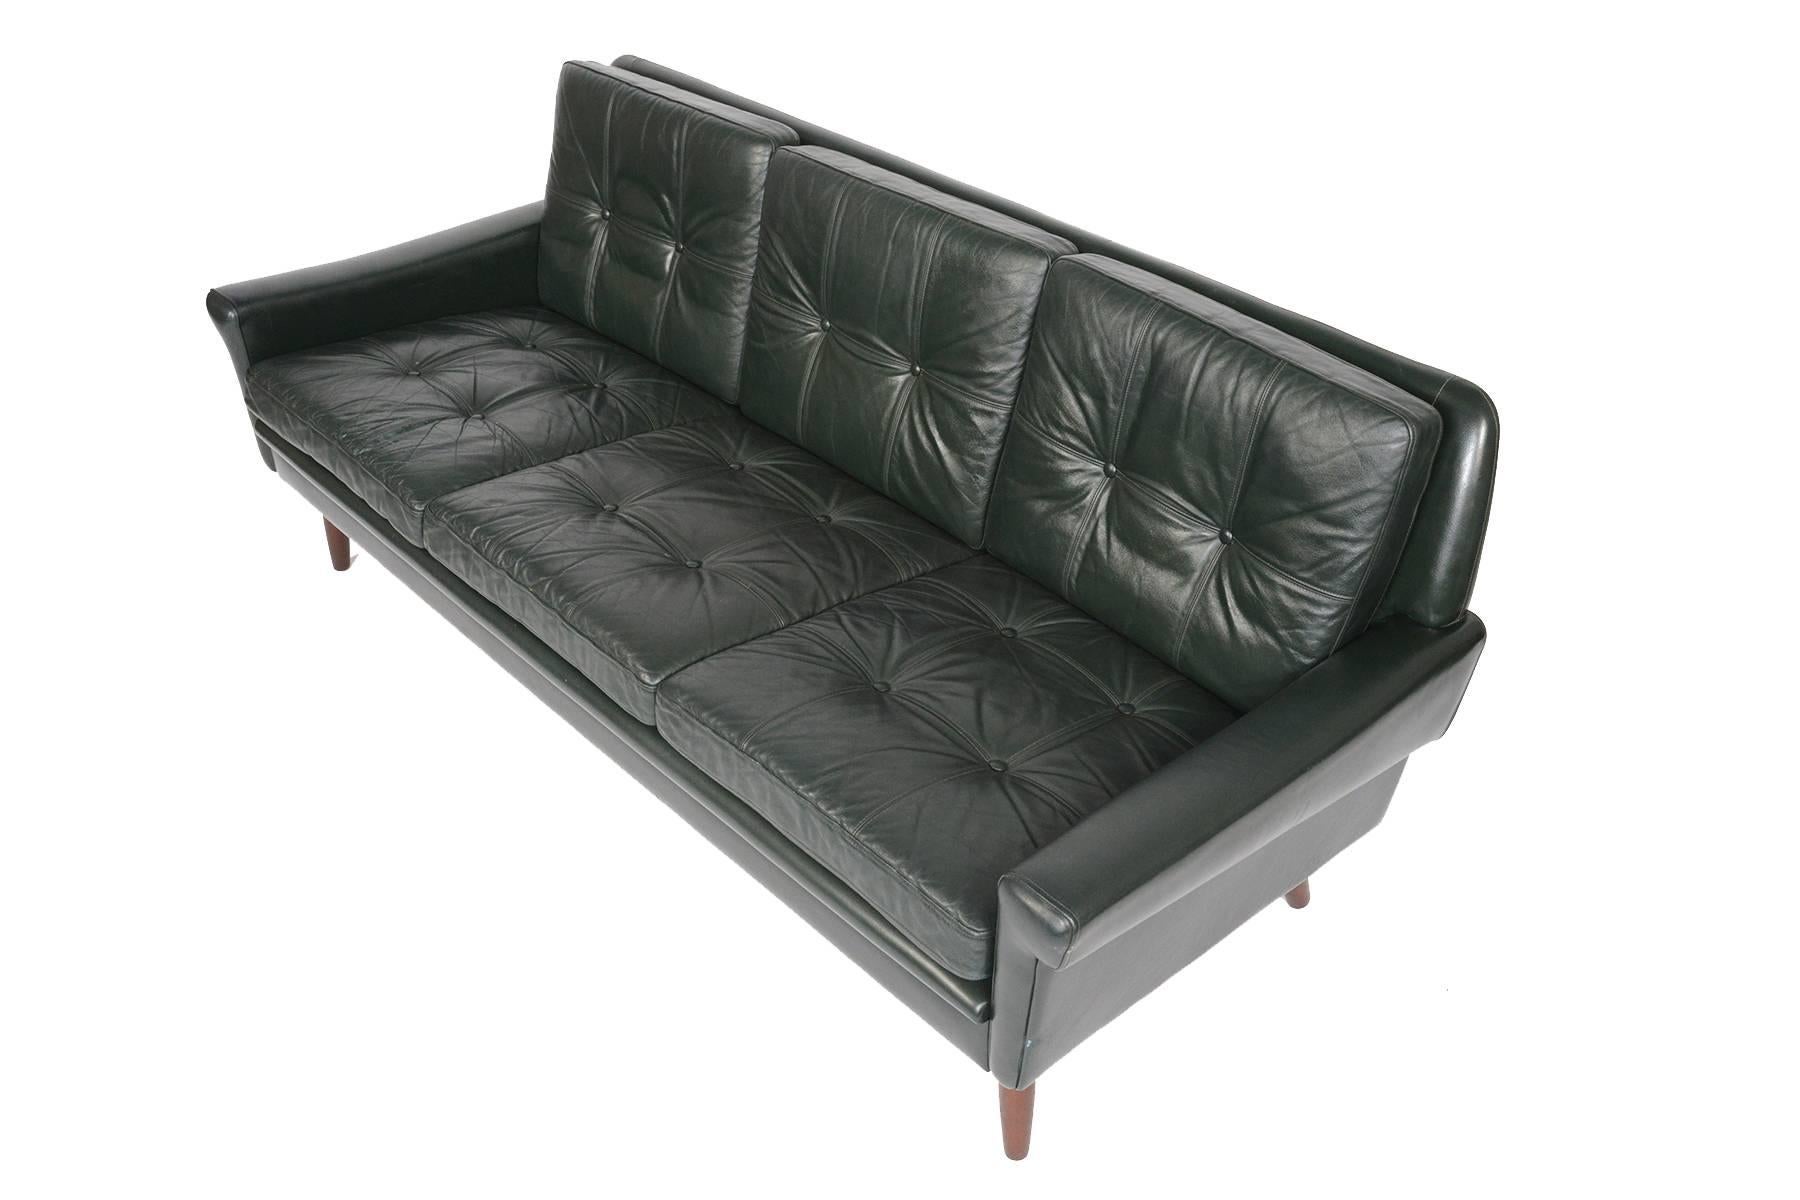 This Danish Modern Mid-Century svend skipper for Skipper Møbelfabrik three-seat sofa in dark green leather hails from the 1960s and will blend perfectly with any modern decor. The frame holds six cushions, each featuring a linear double stitch